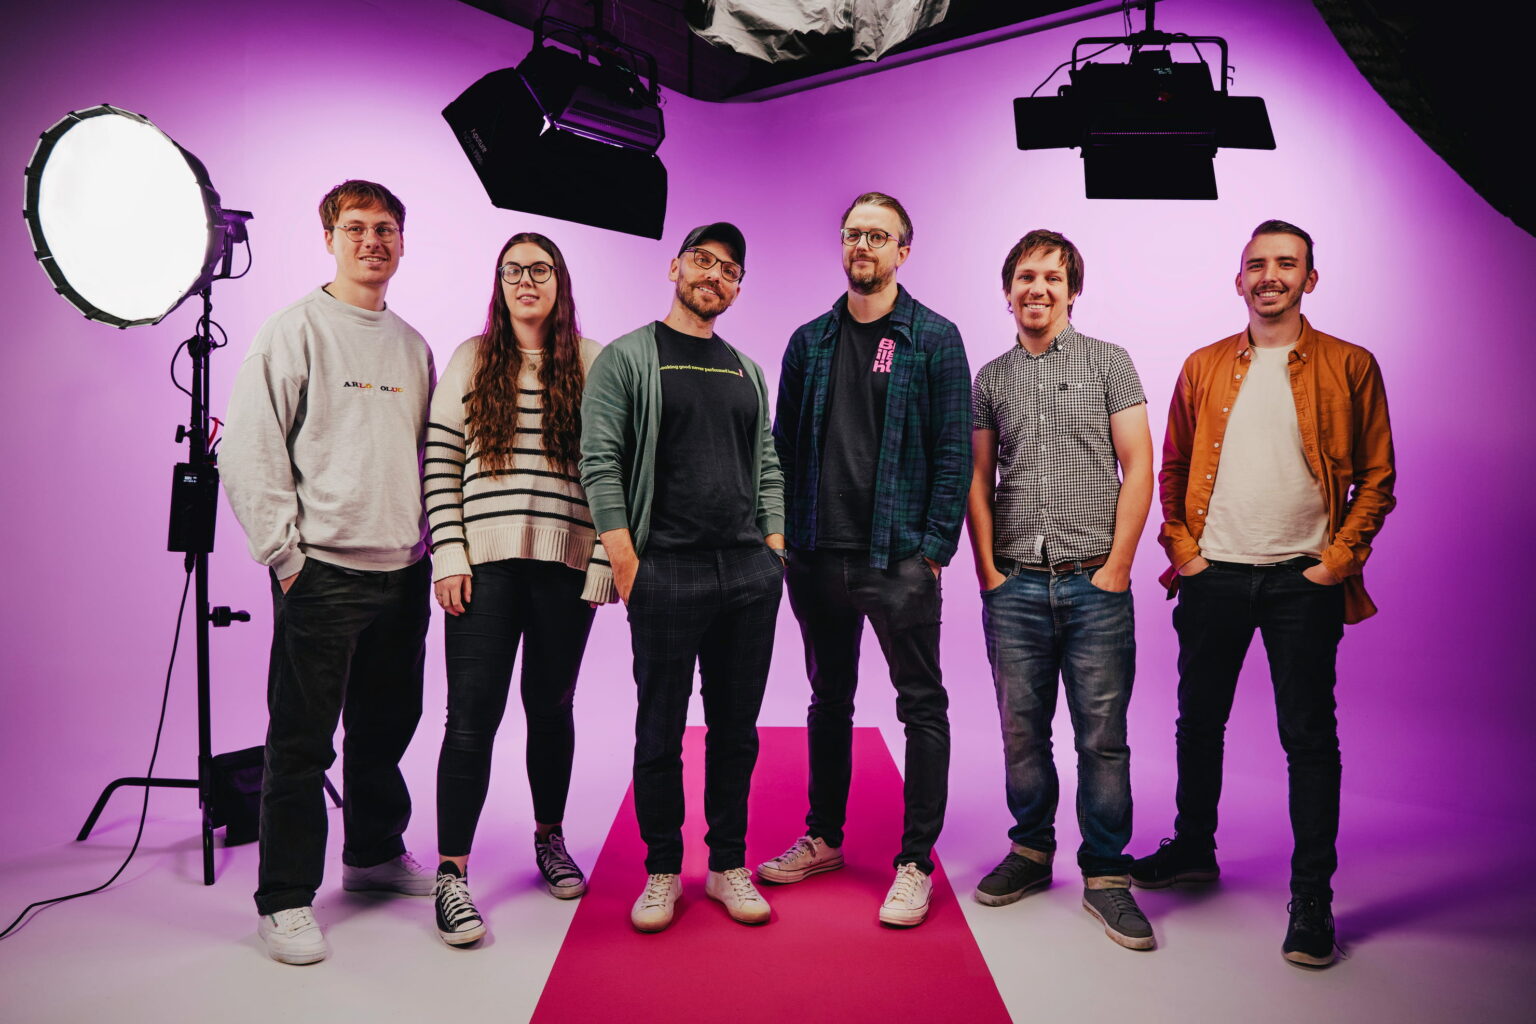 Employees at visual marketing agency Briight standing on a training videography set in front of a purple background